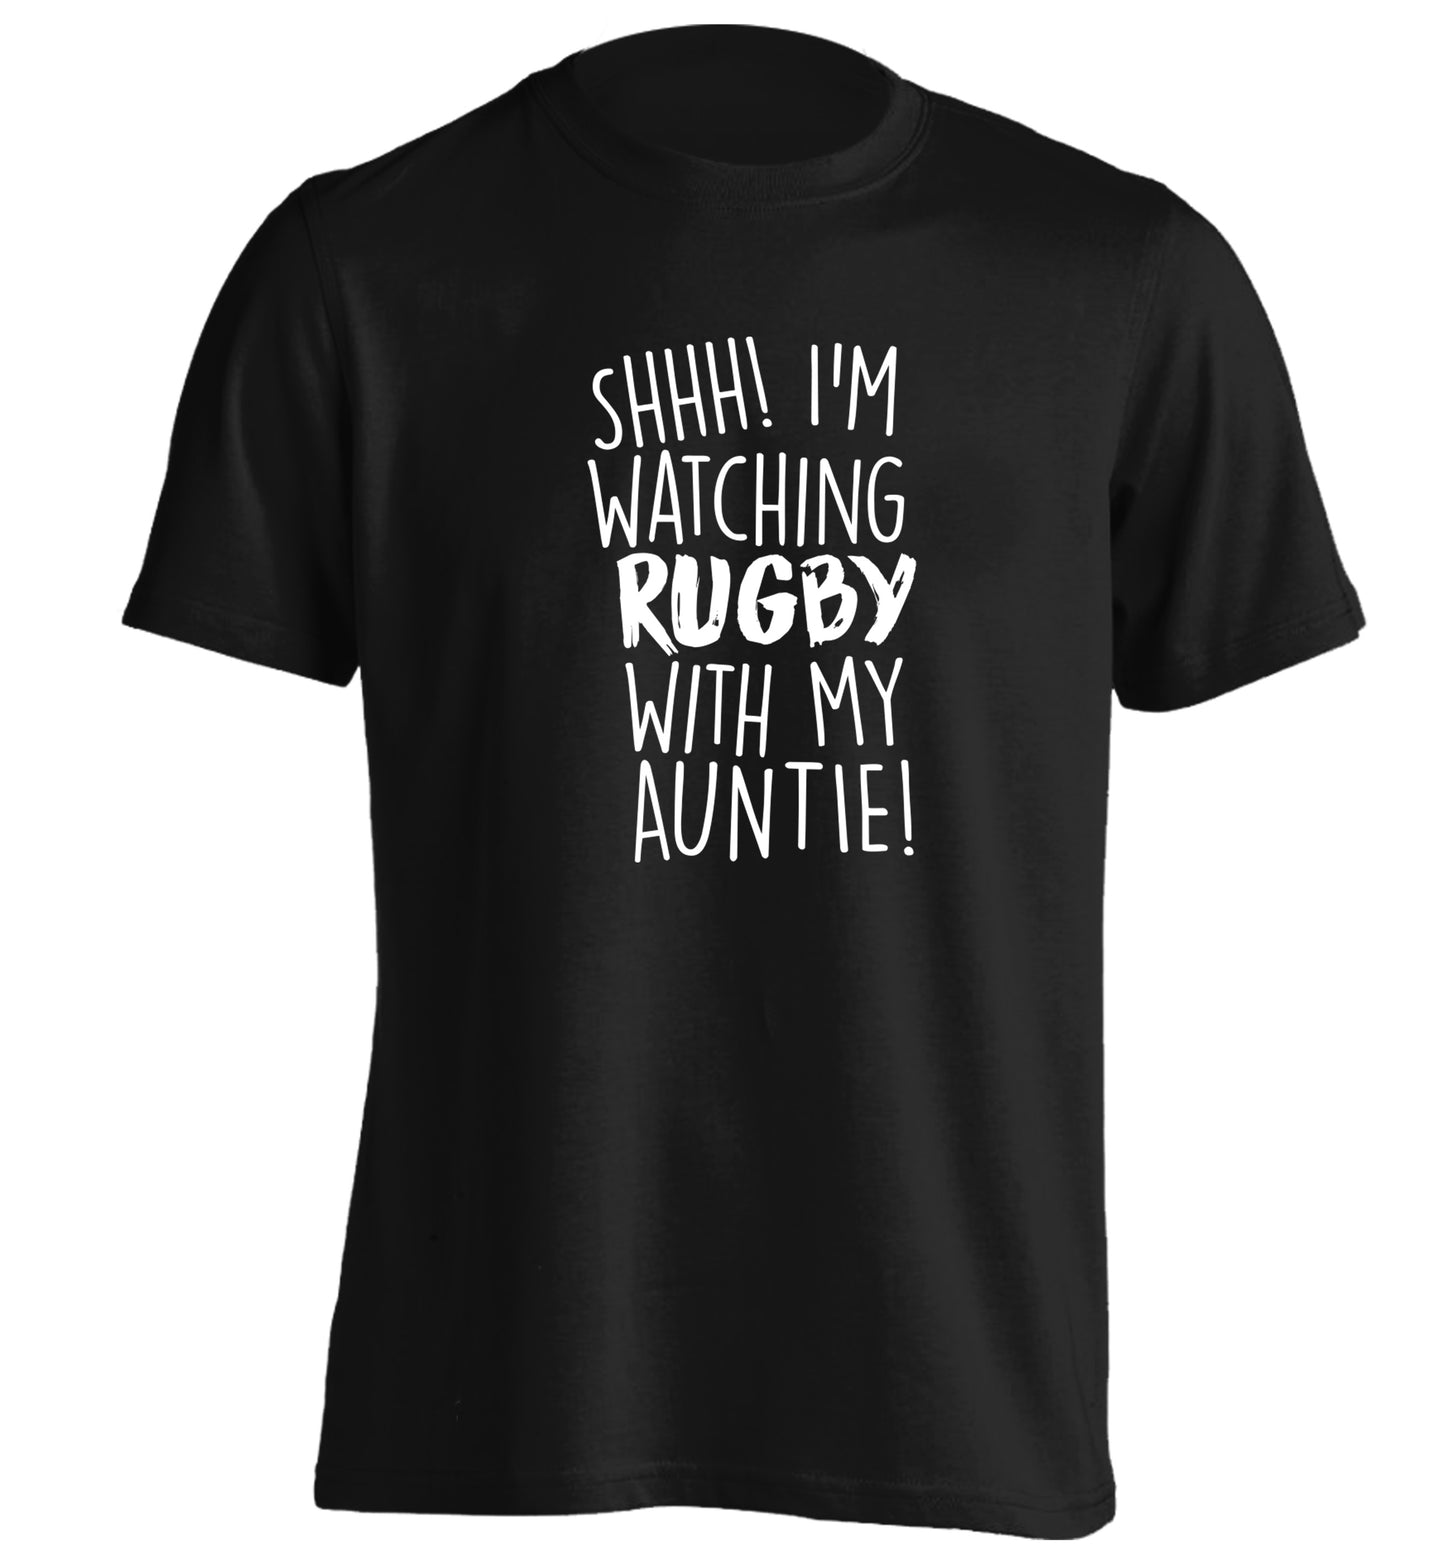 Shhh I'm watchin rugby with my auntie adults unisex black Tshirt 2XL